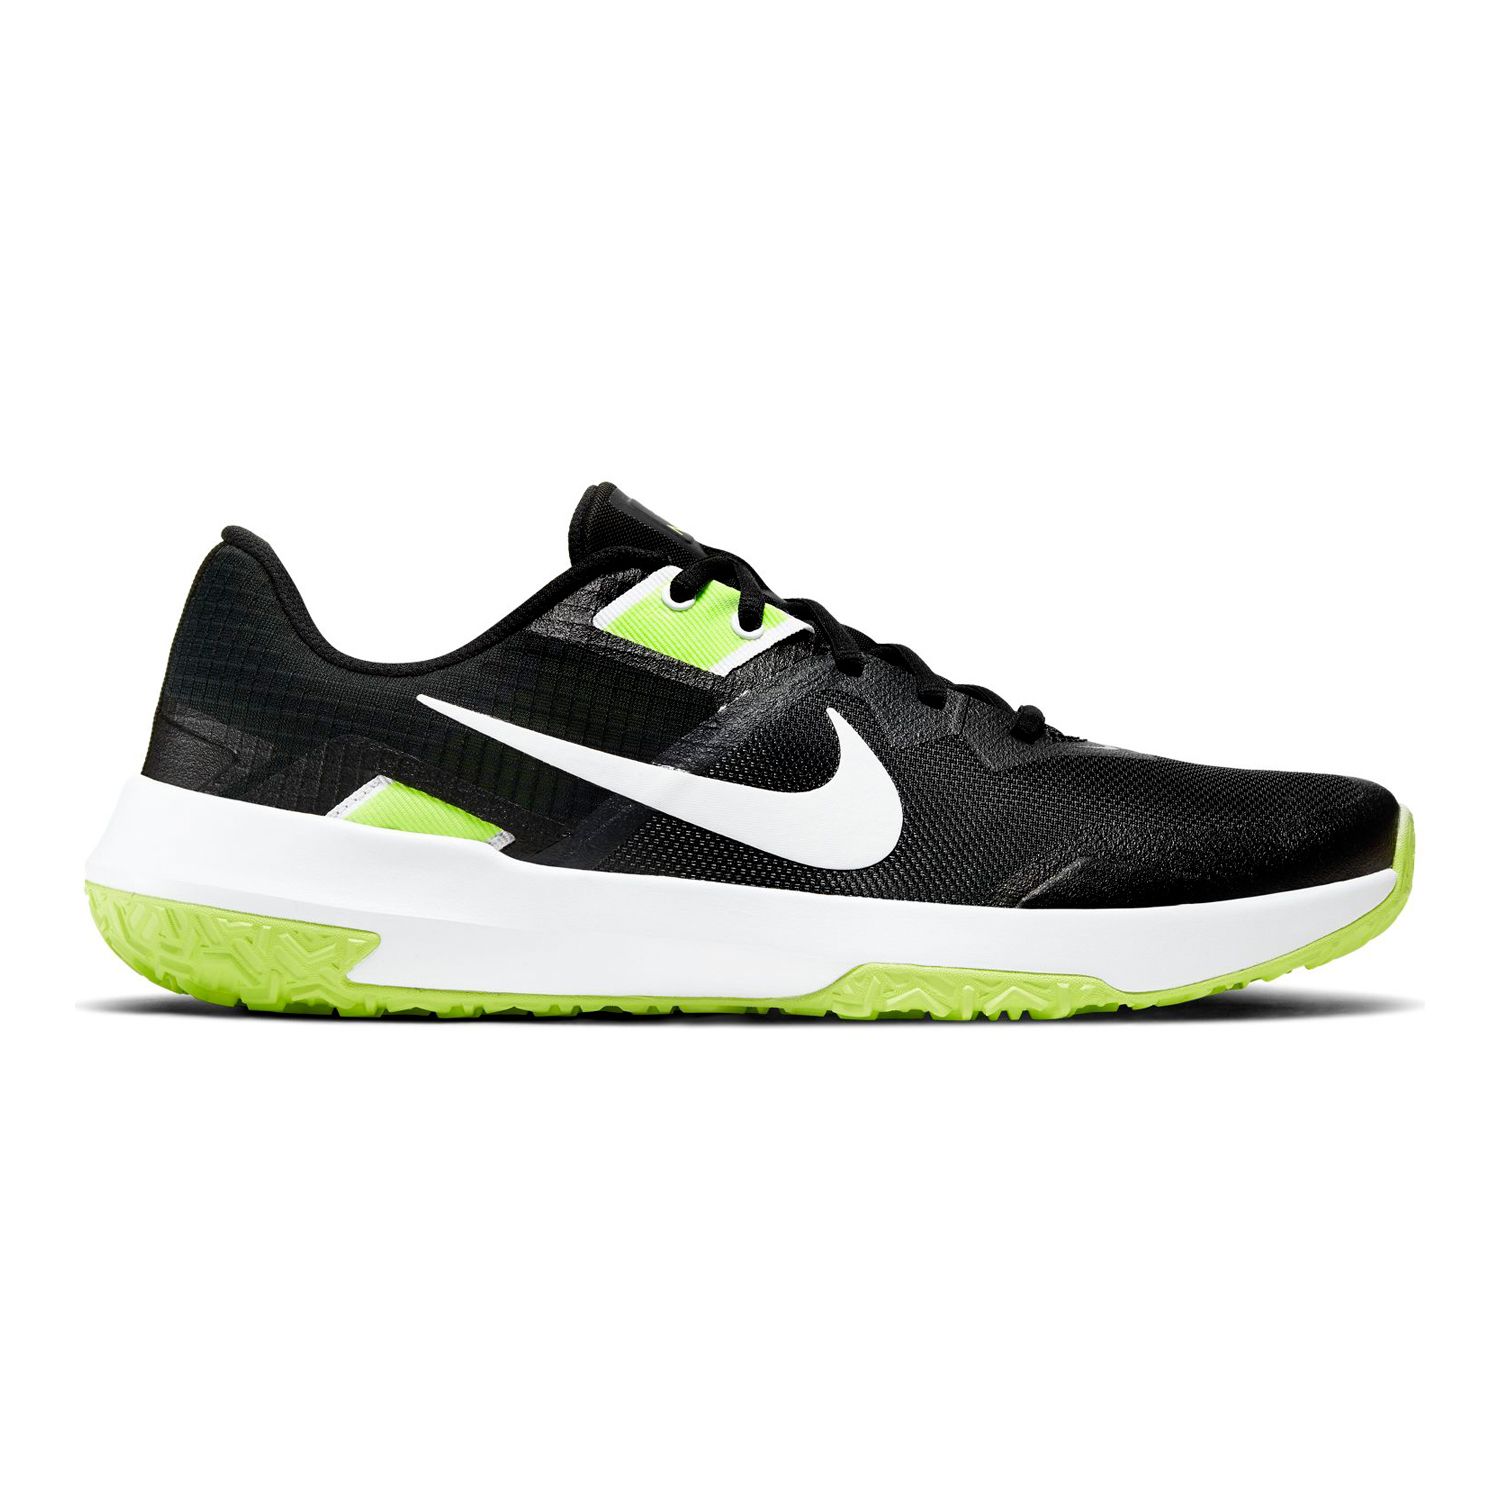 nike varsity compete tr 2 green